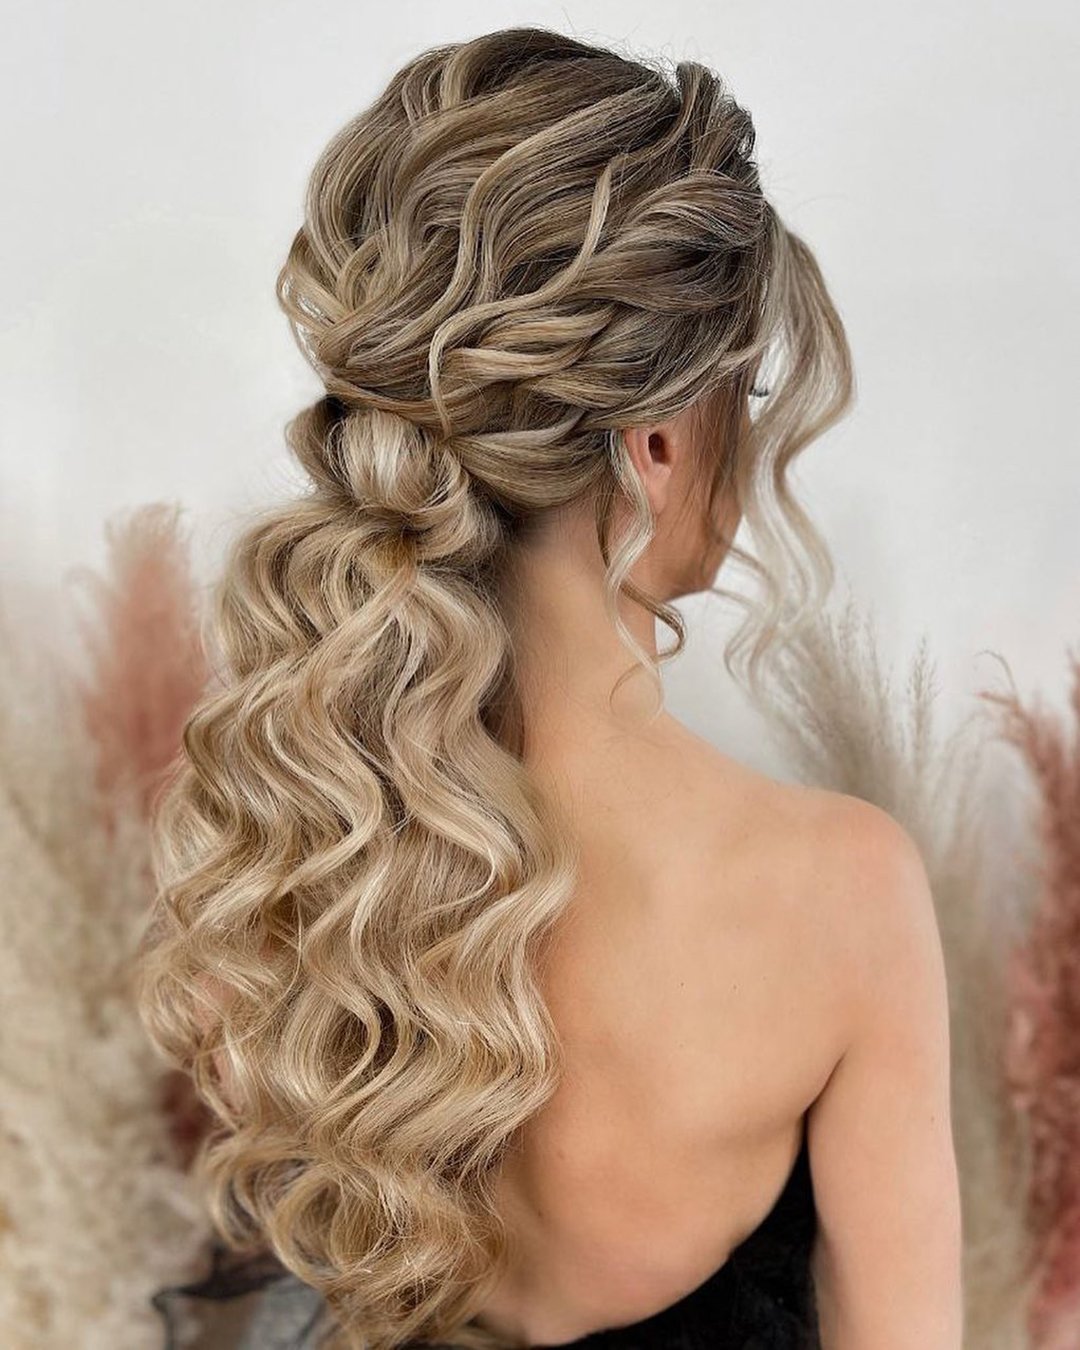 pony tail hairstyles for wedding wavy long simple art4studio